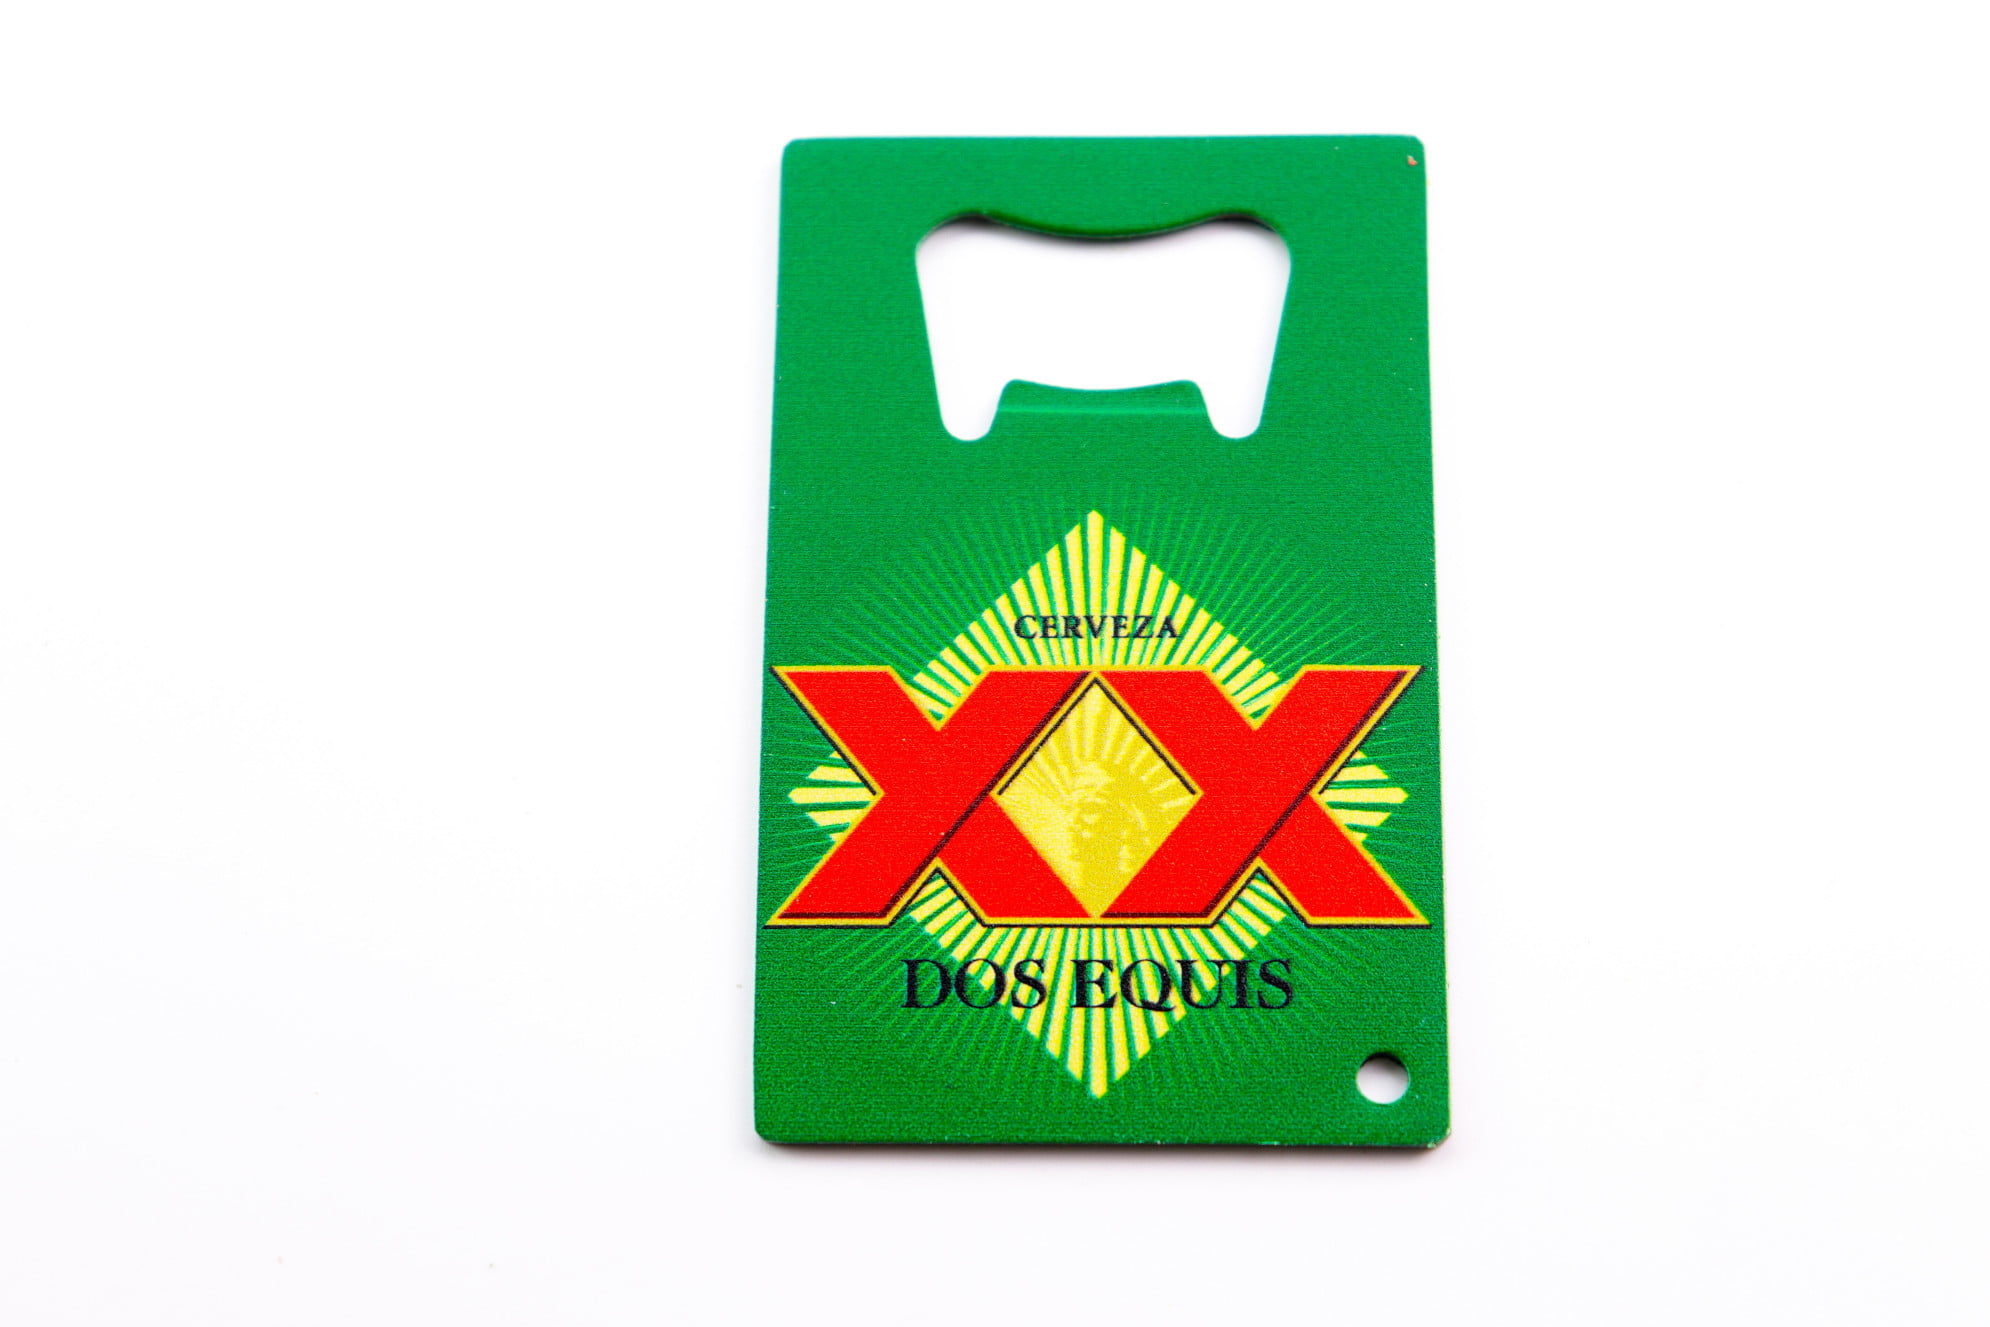 HEAVY DUTY NEW--Lot of 2 Rare DOS EQUIS BEER BOTTLE OPENER KEY CHAIN 